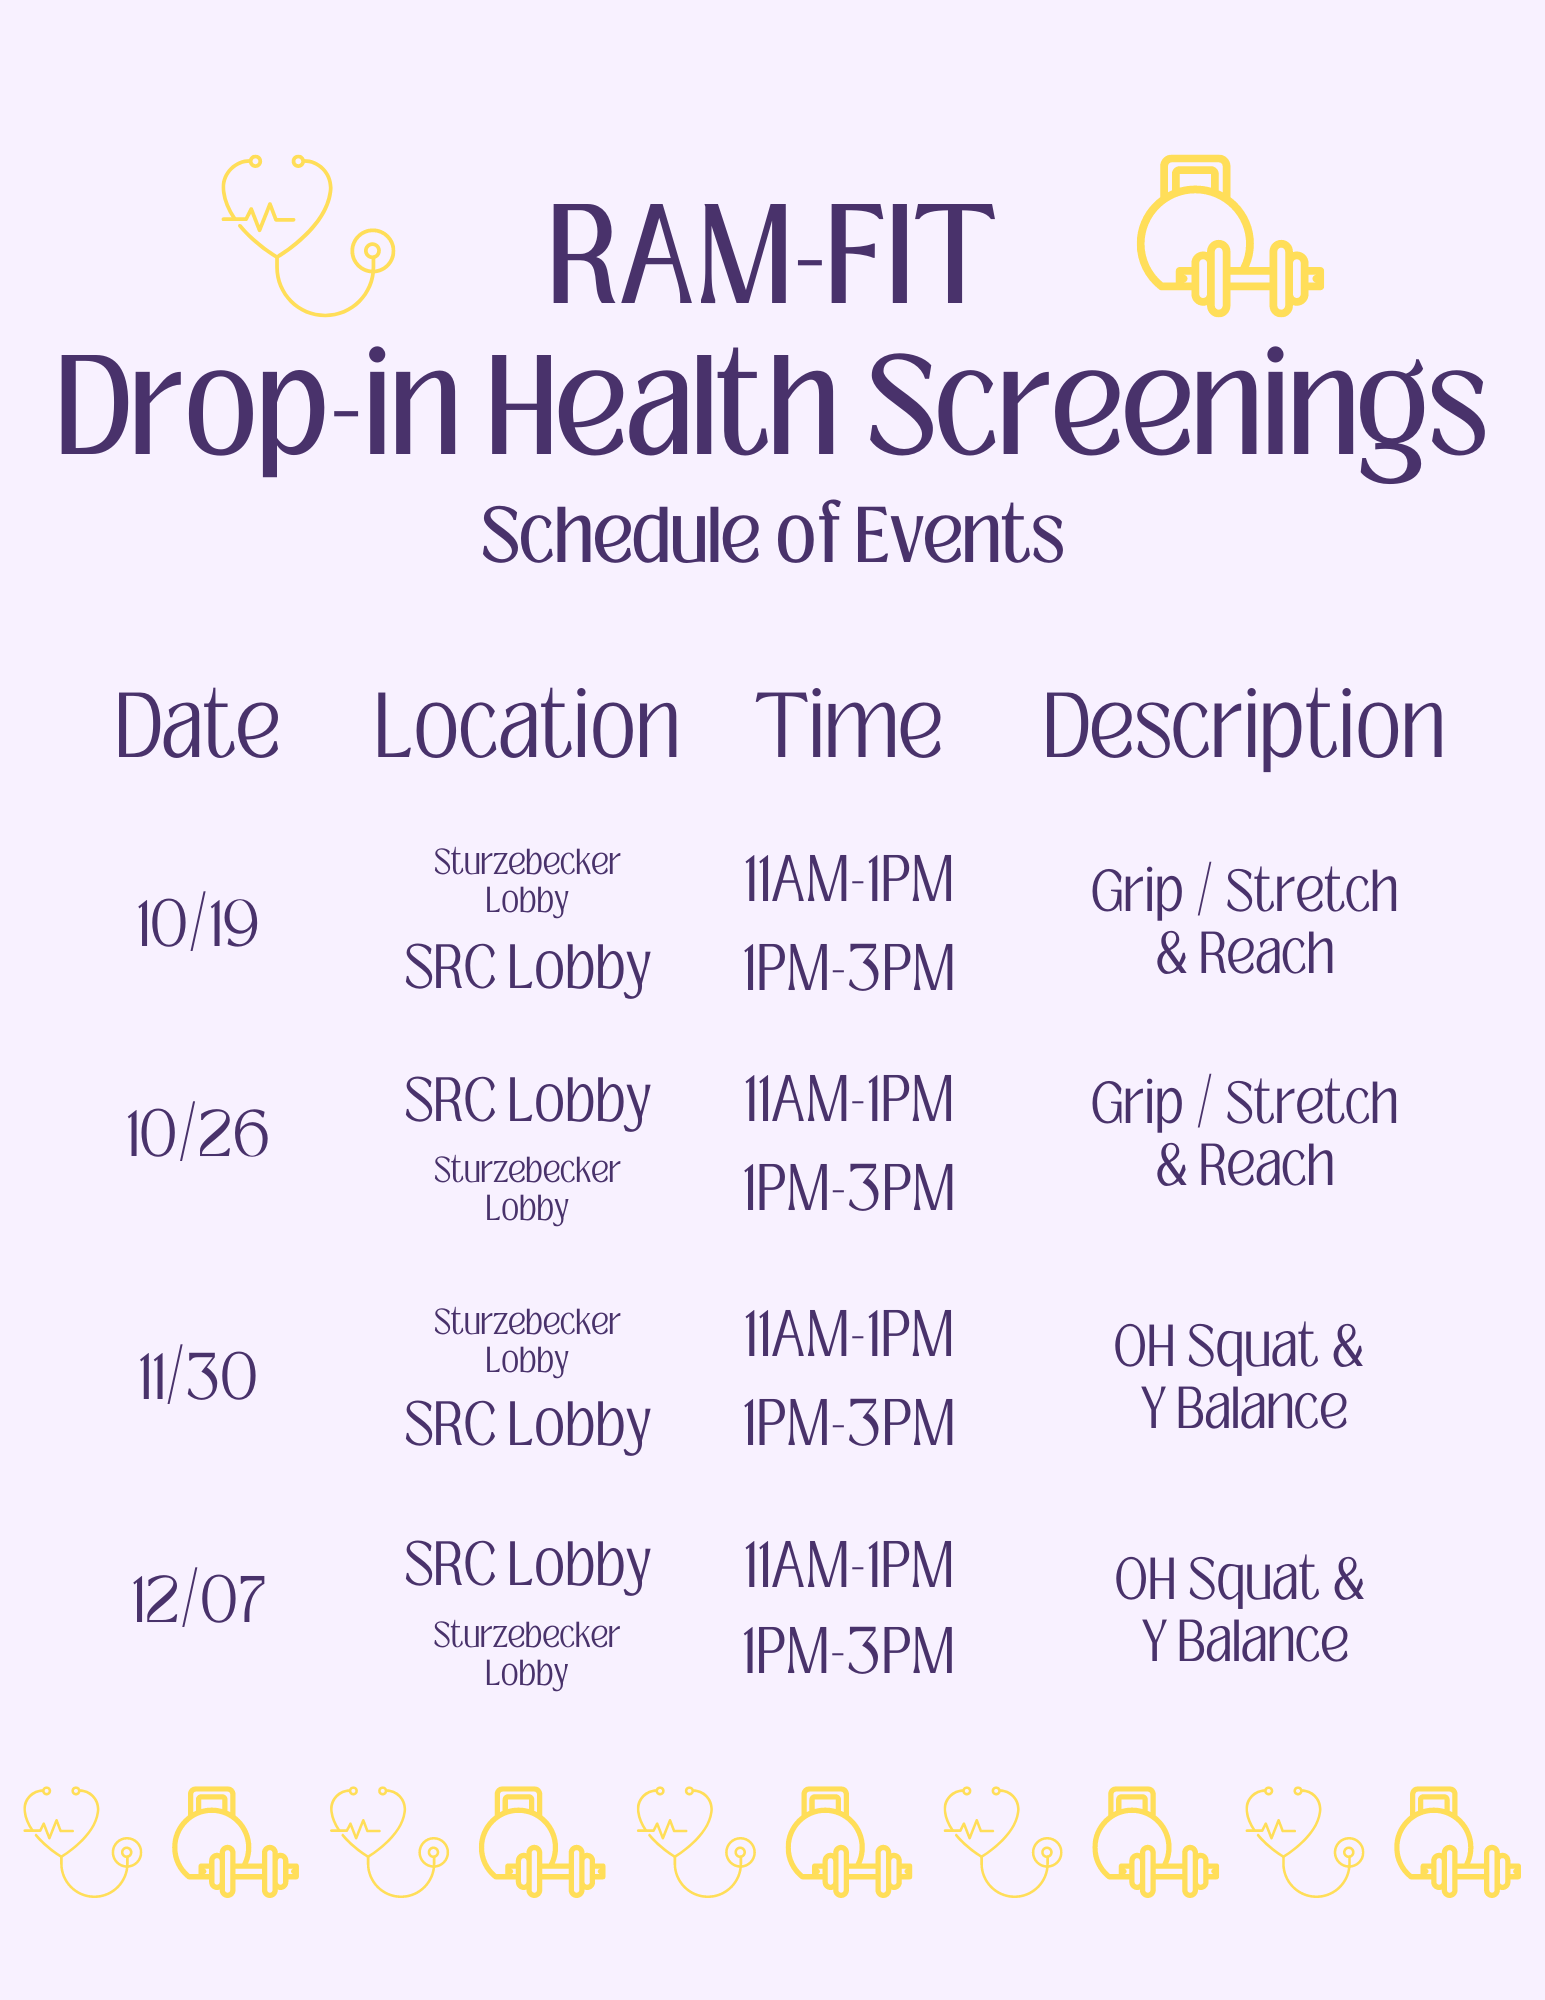 Ram-Fit Drop-in Health Screenings Schedule of Events: 10/19 - Sturzebecker Lobby 11AM - 1PM and SRC Lobby 1PM - 3PM, Grip / Stretch & Reach. 10/26 - SRC Lobby 11AM - 1PM and Sturzebecker Lobby 1PM - 3PM, Grip / Stretch & Reach. 11/30 - Sturzebecker Lobby 11AM - 1PM and SRC Lobby 1PM - 3PM, OH Squat & Y Balance. 12/07 - SRC Lobby 11AM - 1PM and Sturzebecker Lobby 1PM - 3PM, OH Squat & Y Balance